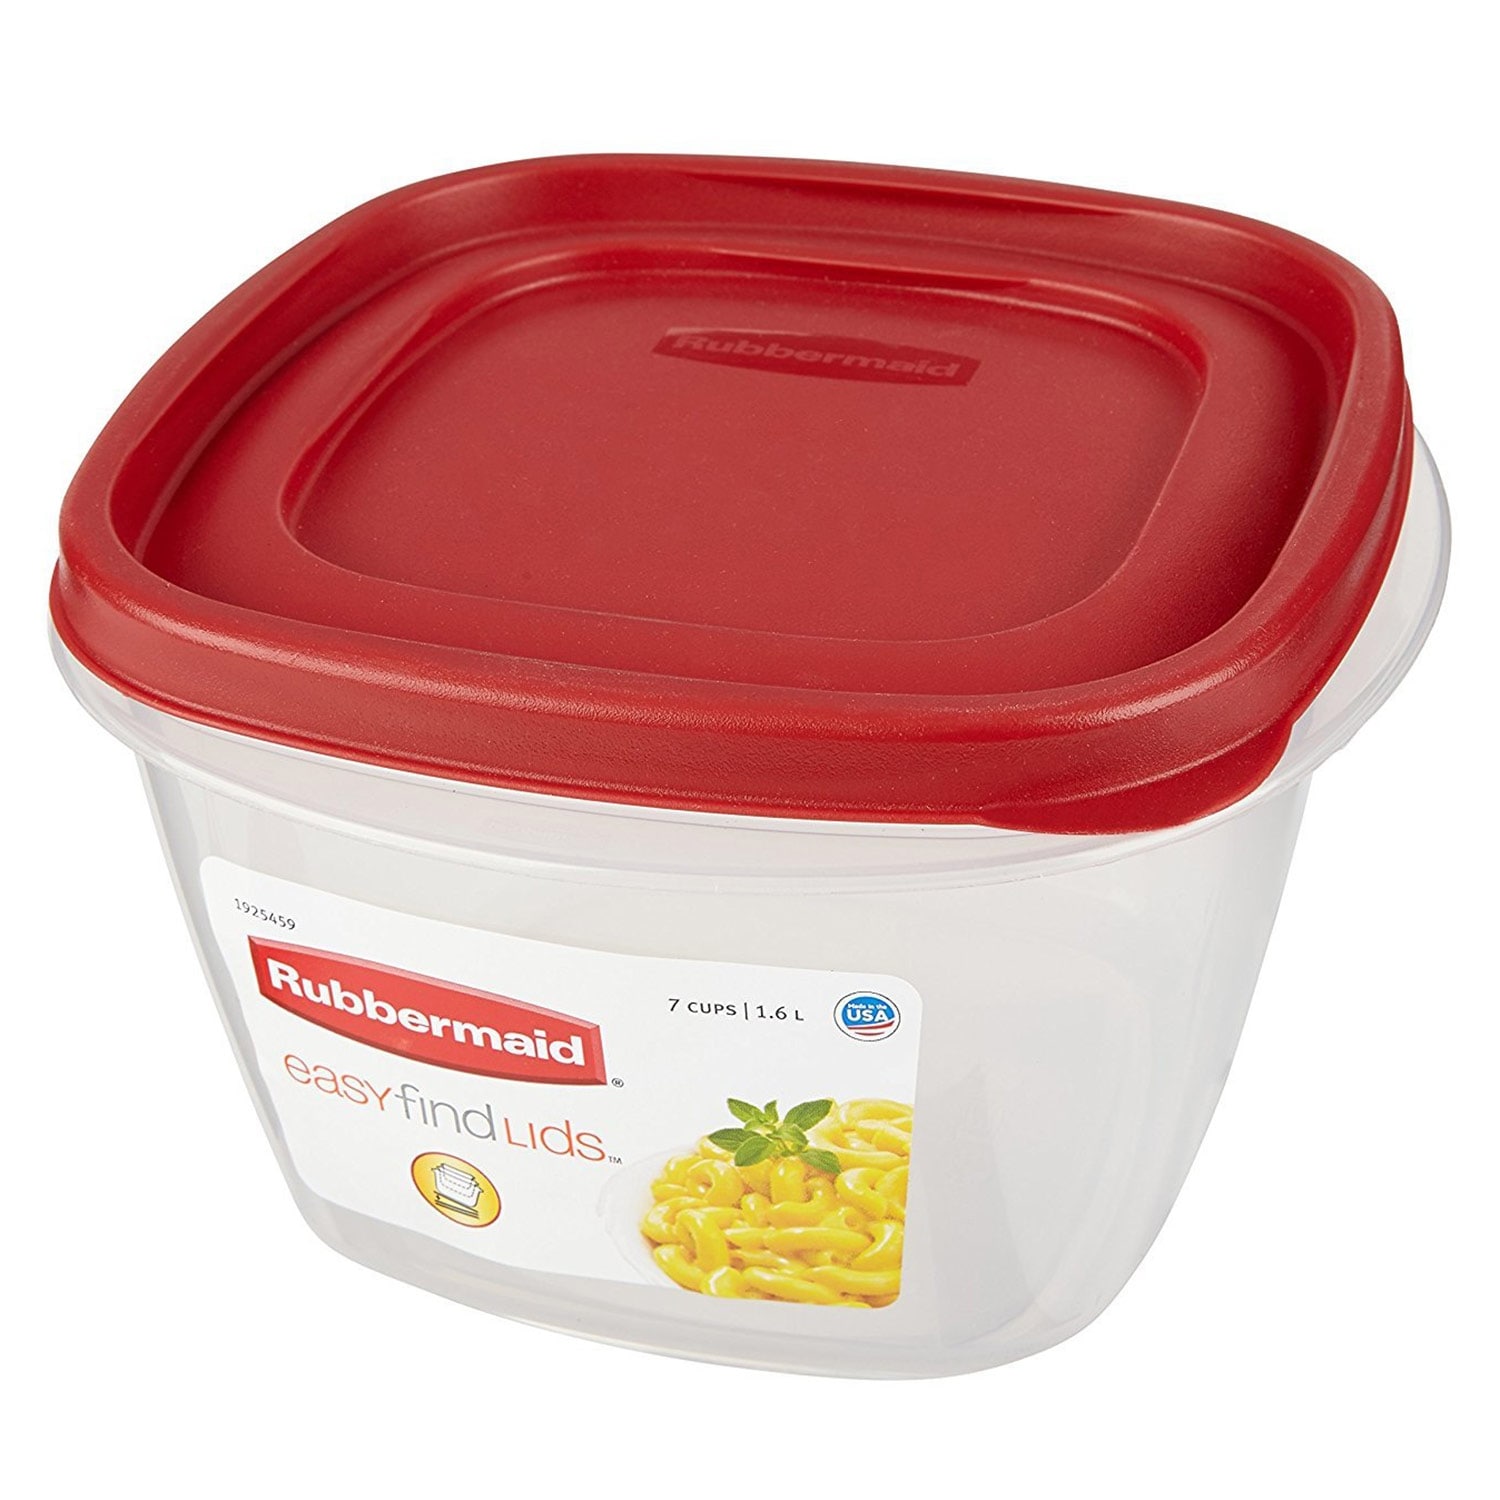 https://ak1.ostkcdn.com/images/products/is/images/direct/328107526e1904f8f6989f2ad8dbf4fe87b66d6f/Rubbermaid-Easy-Find-Lid-Food-Storage-Container%2C-7-Cup%2C-Red.jpg